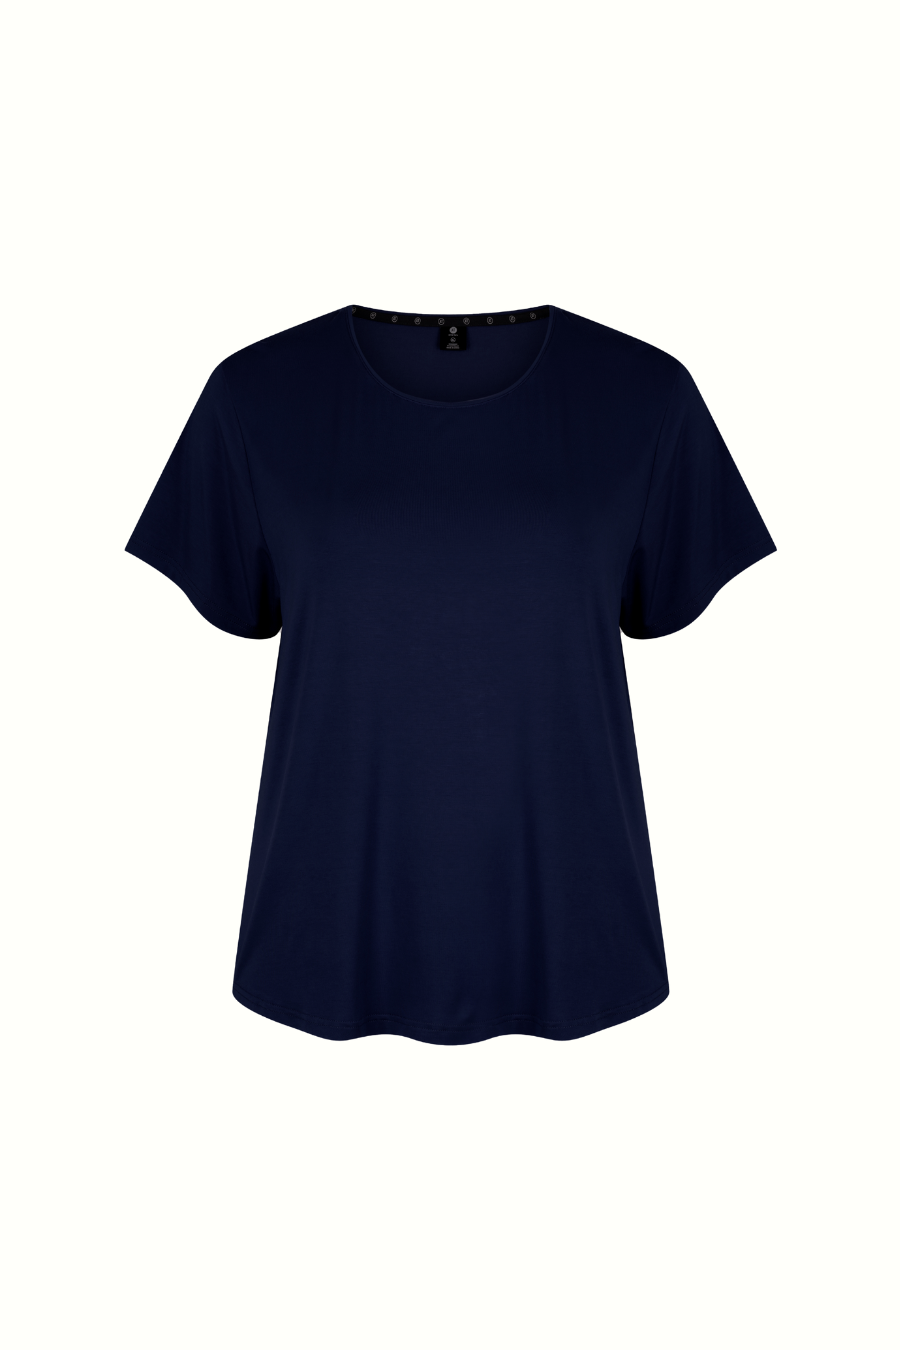 Classic Bamboo T-Shirt - Midnight from Active Truth™
